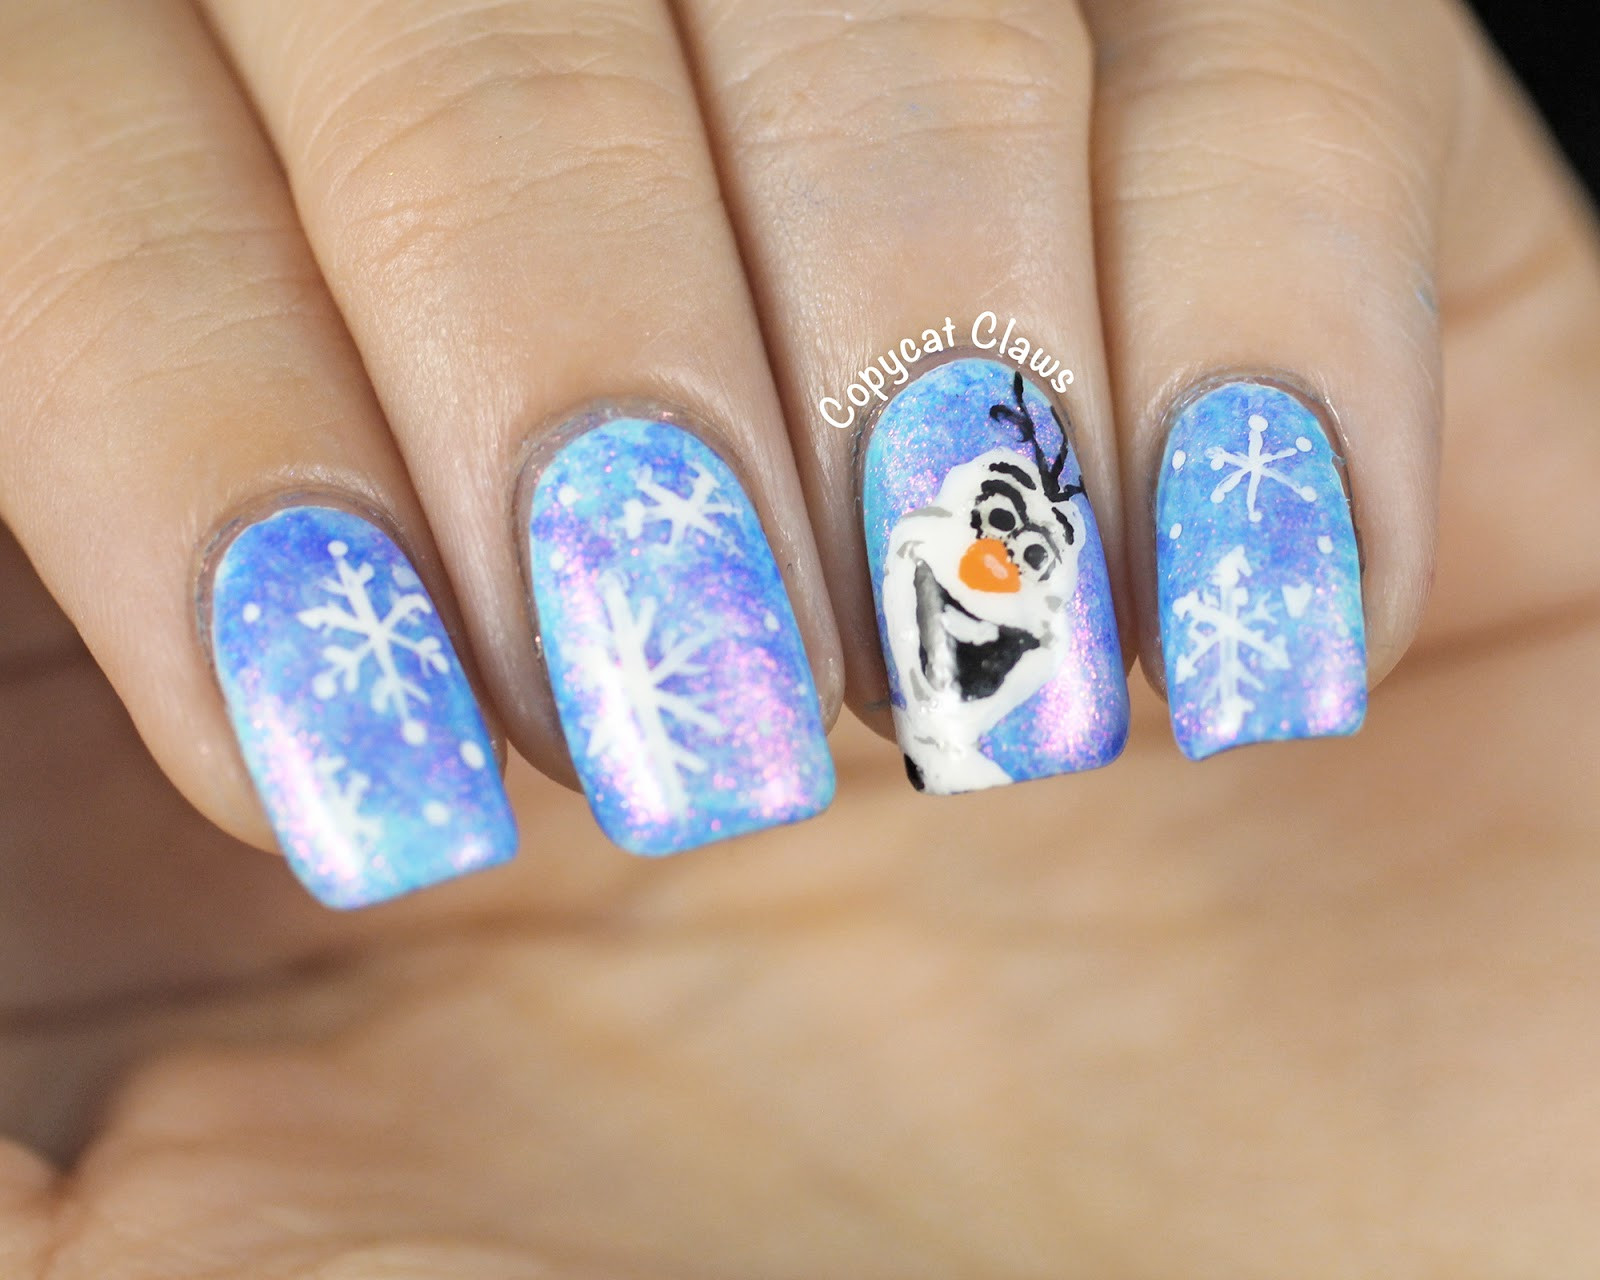 Olaf Nail Designs
 Copycat Claws 31DC2014 Day 23 Inspired by a movie